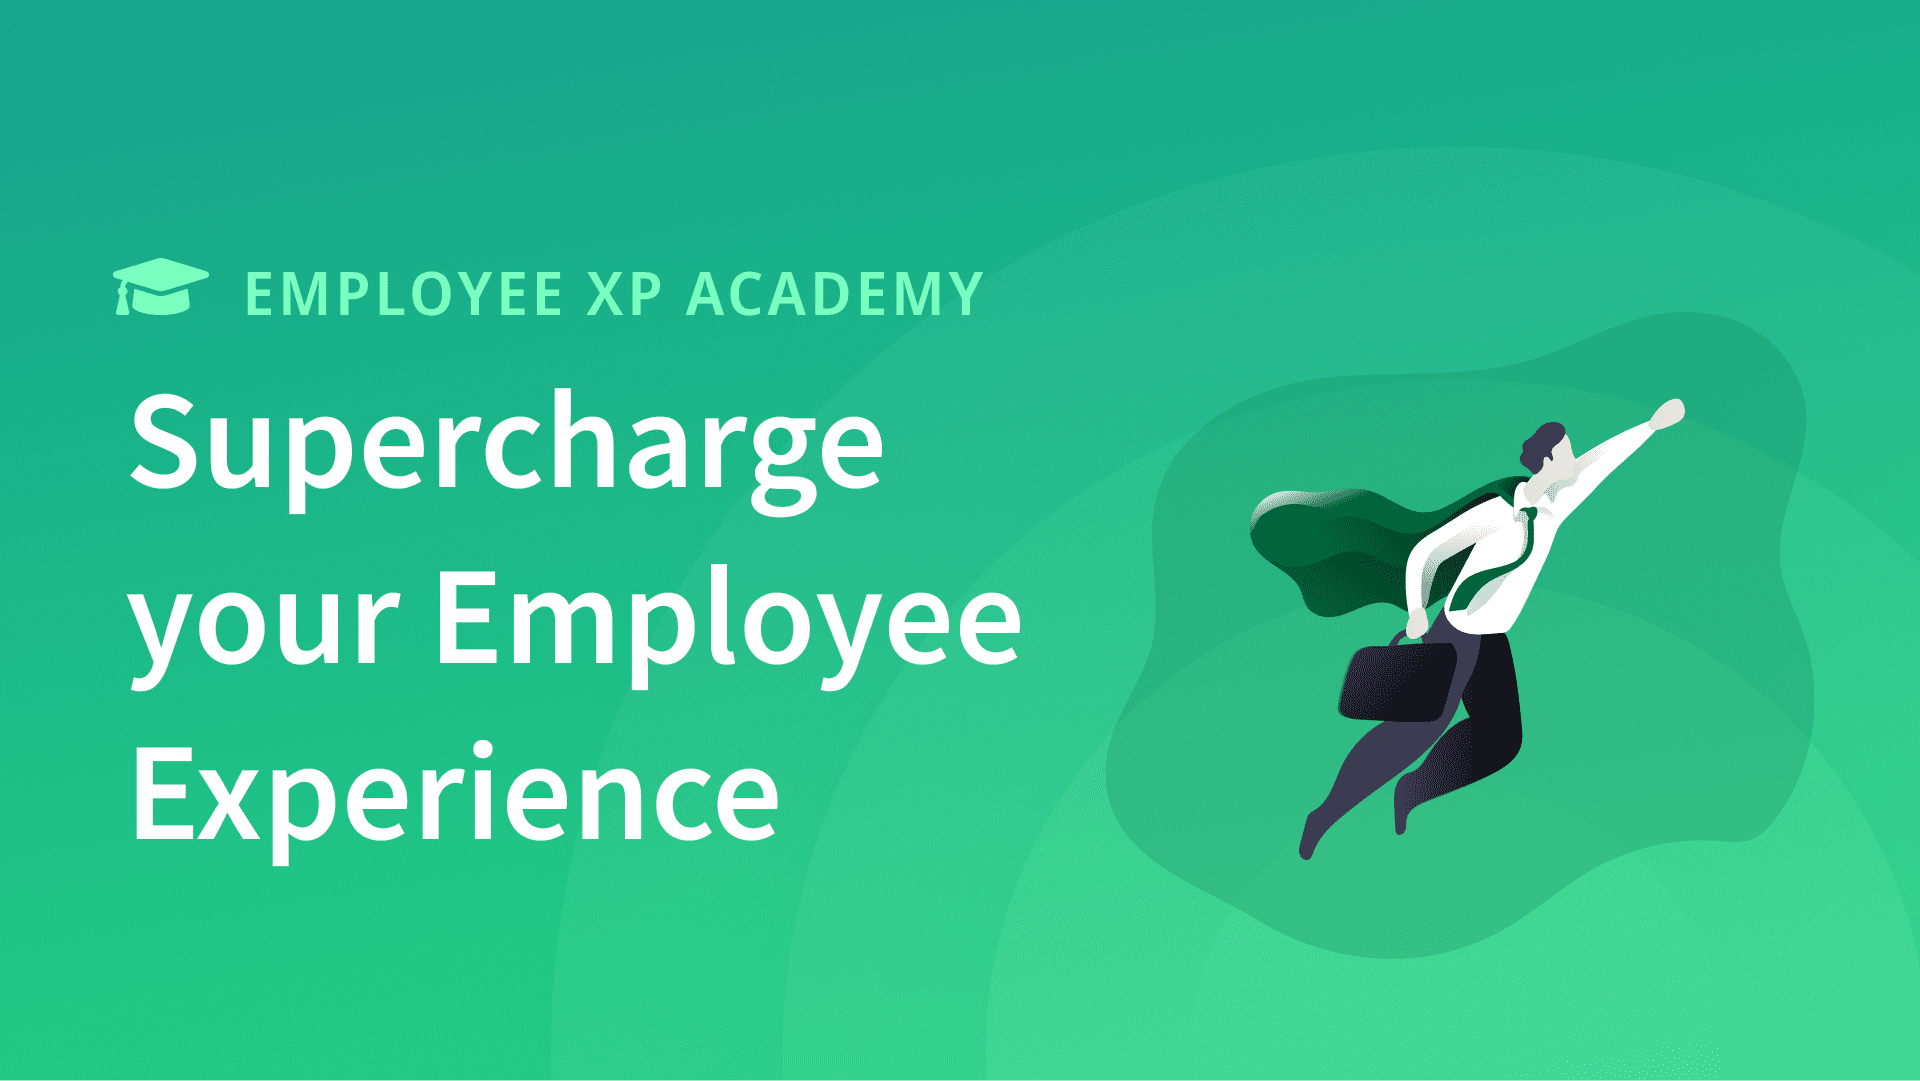 10 best practicies to supercharge your employee experience